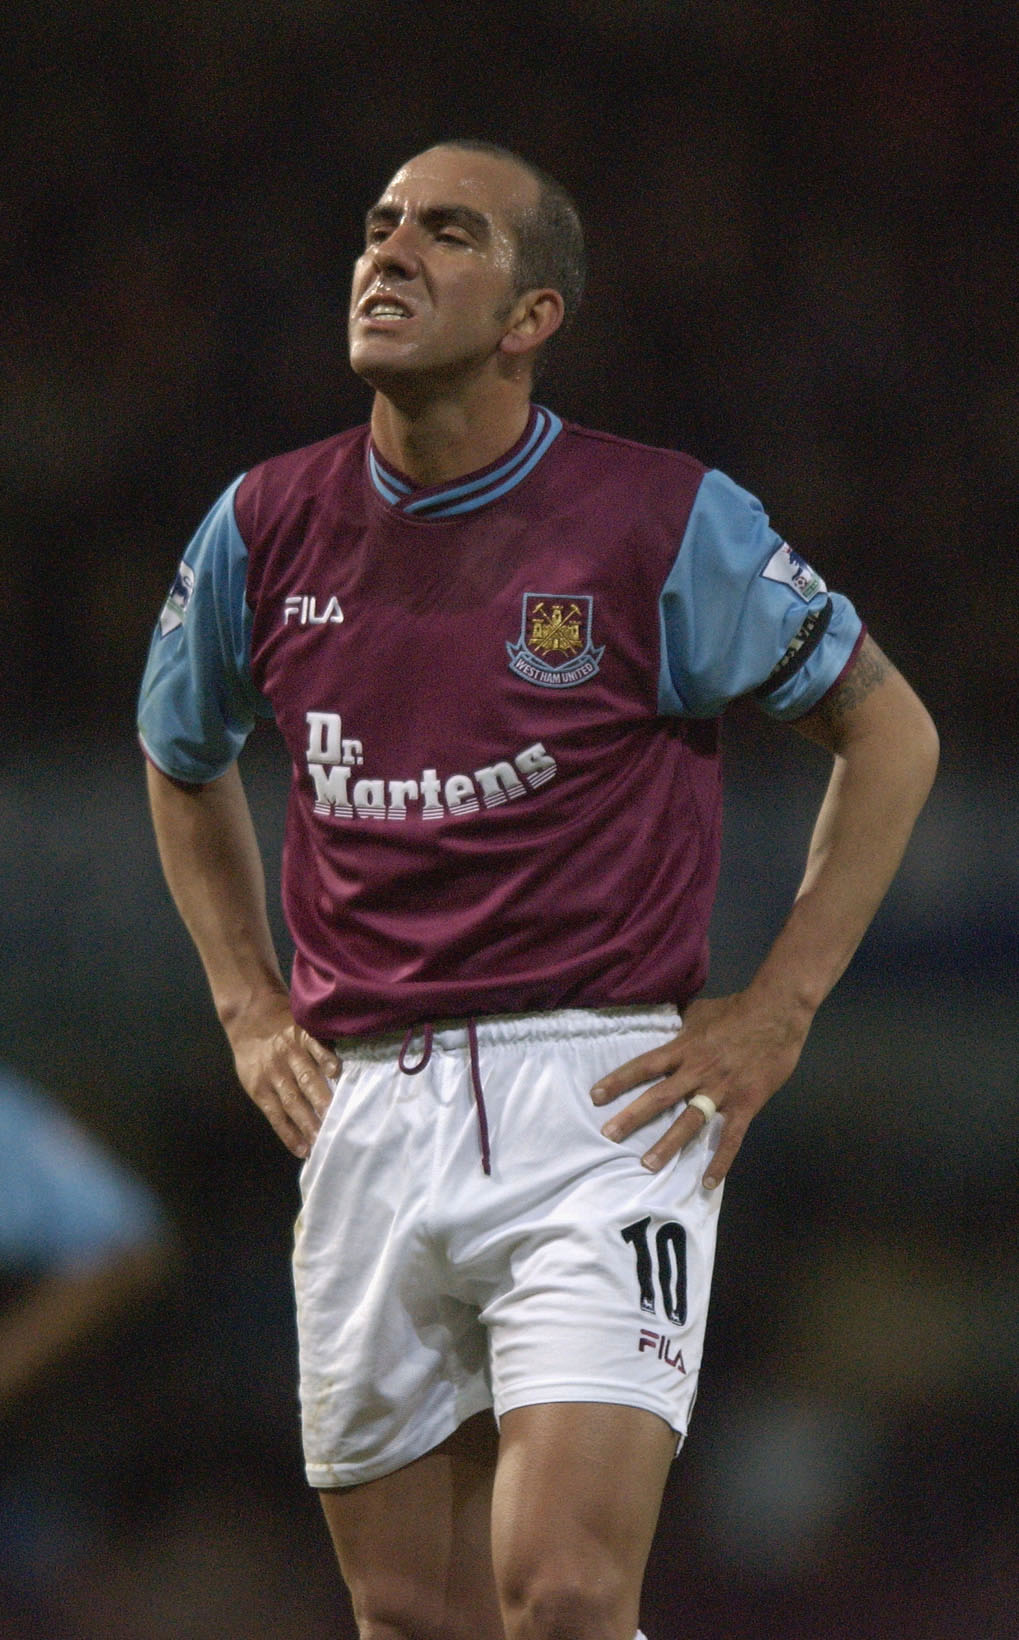 LONDON - JANUARY 29:  Paolo Di Canio of West Ham stands with his hands on his hips during the FA Barclaycard Premiership match between West Ham United v Blackburn Rovers at Upton Park, London on January 29, 2003. (Photo by Jamie McDonald/Getty Images)